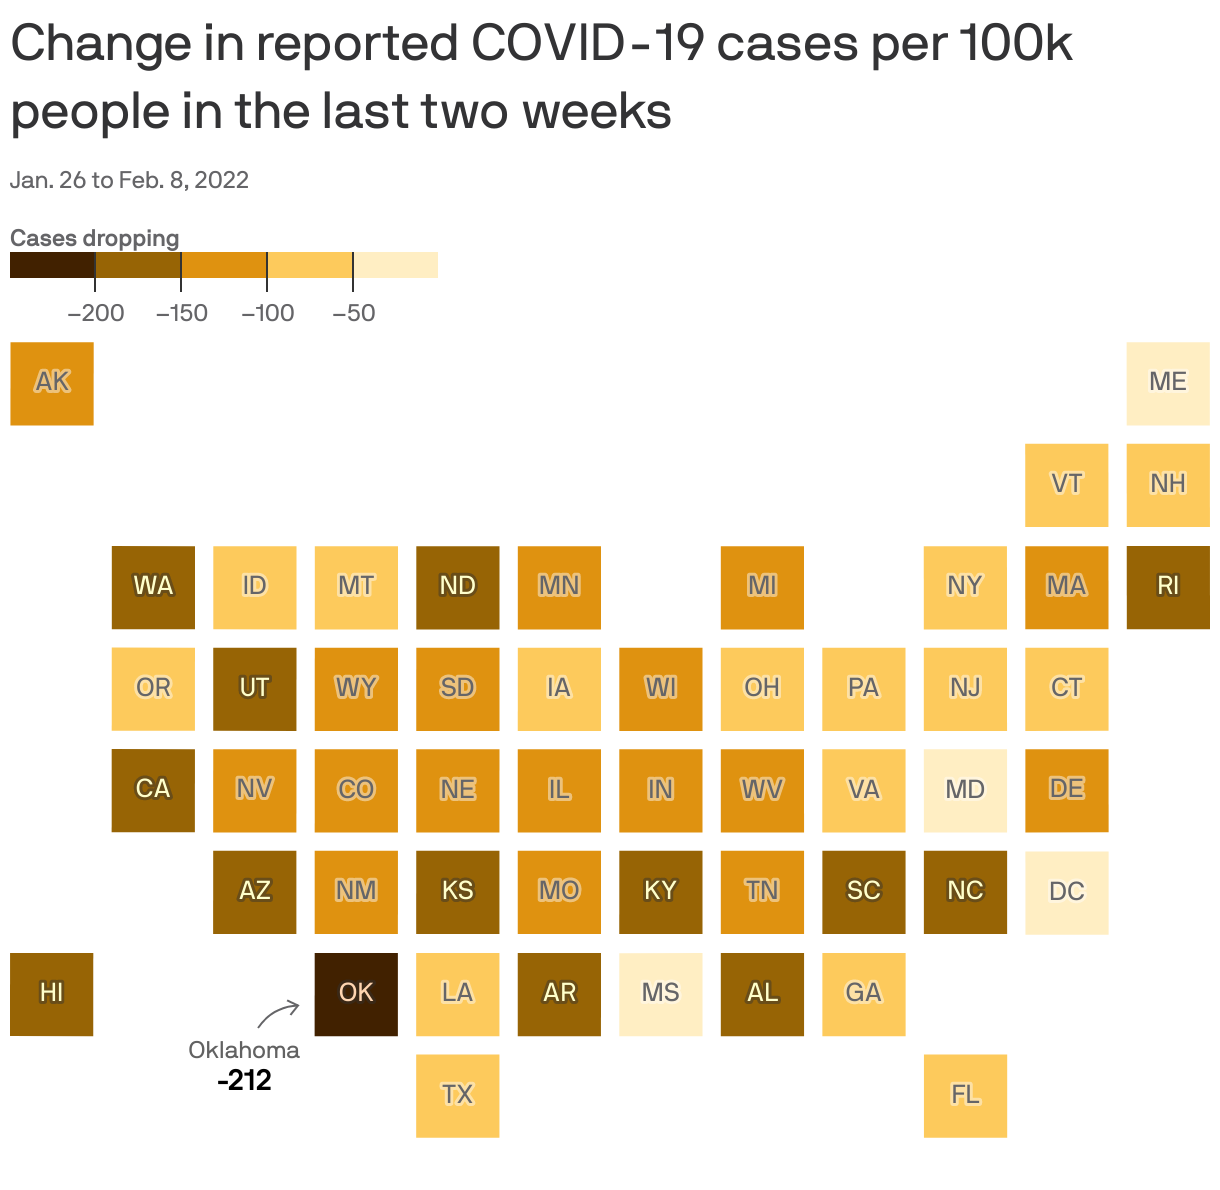 Change in reported COVID-19 cases per 100k people in the last two weeks